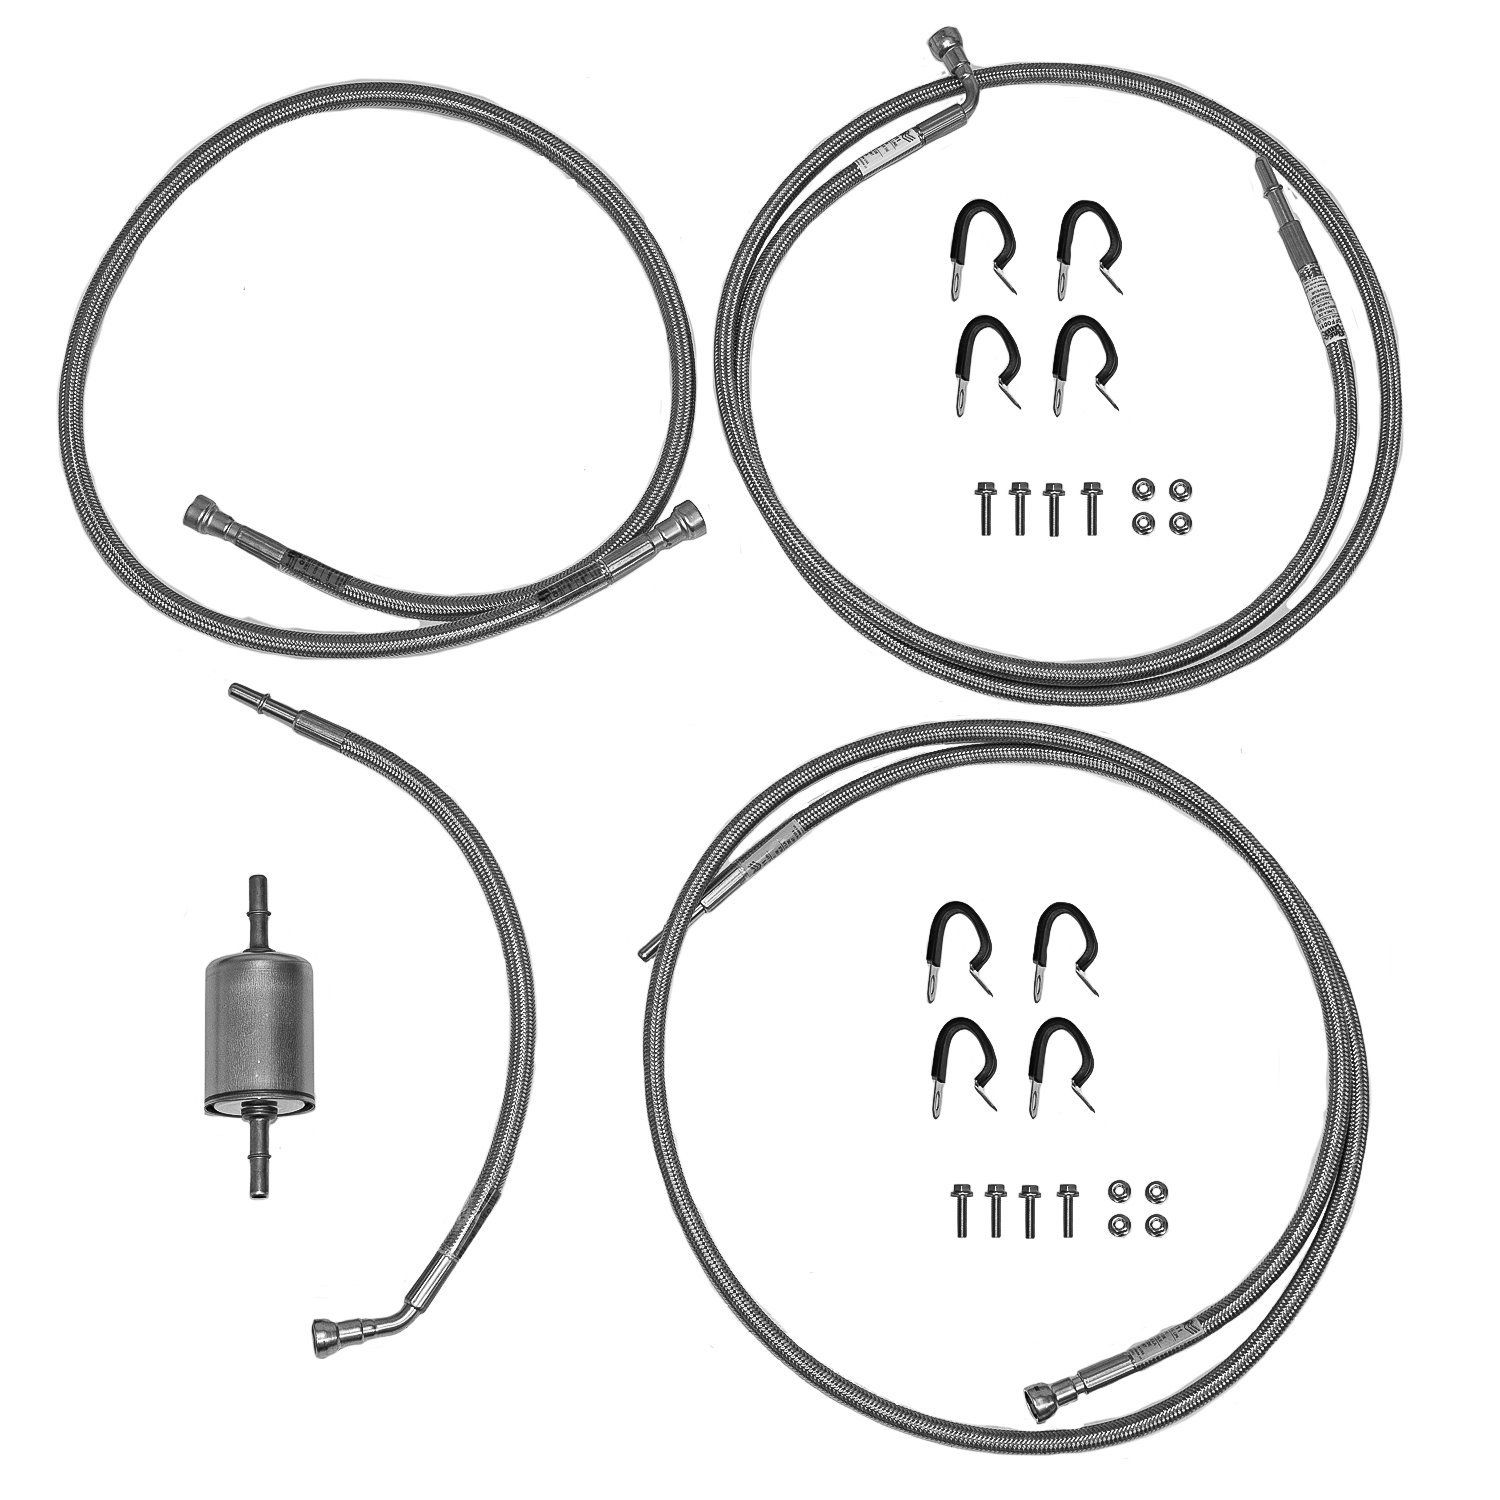 Quick-Fix Fuel Line Kit for 2000-2003 GM Tahoe, Suburban 1500, Yukon/1500 XL Full-Size SUVs [Braided Stainless]